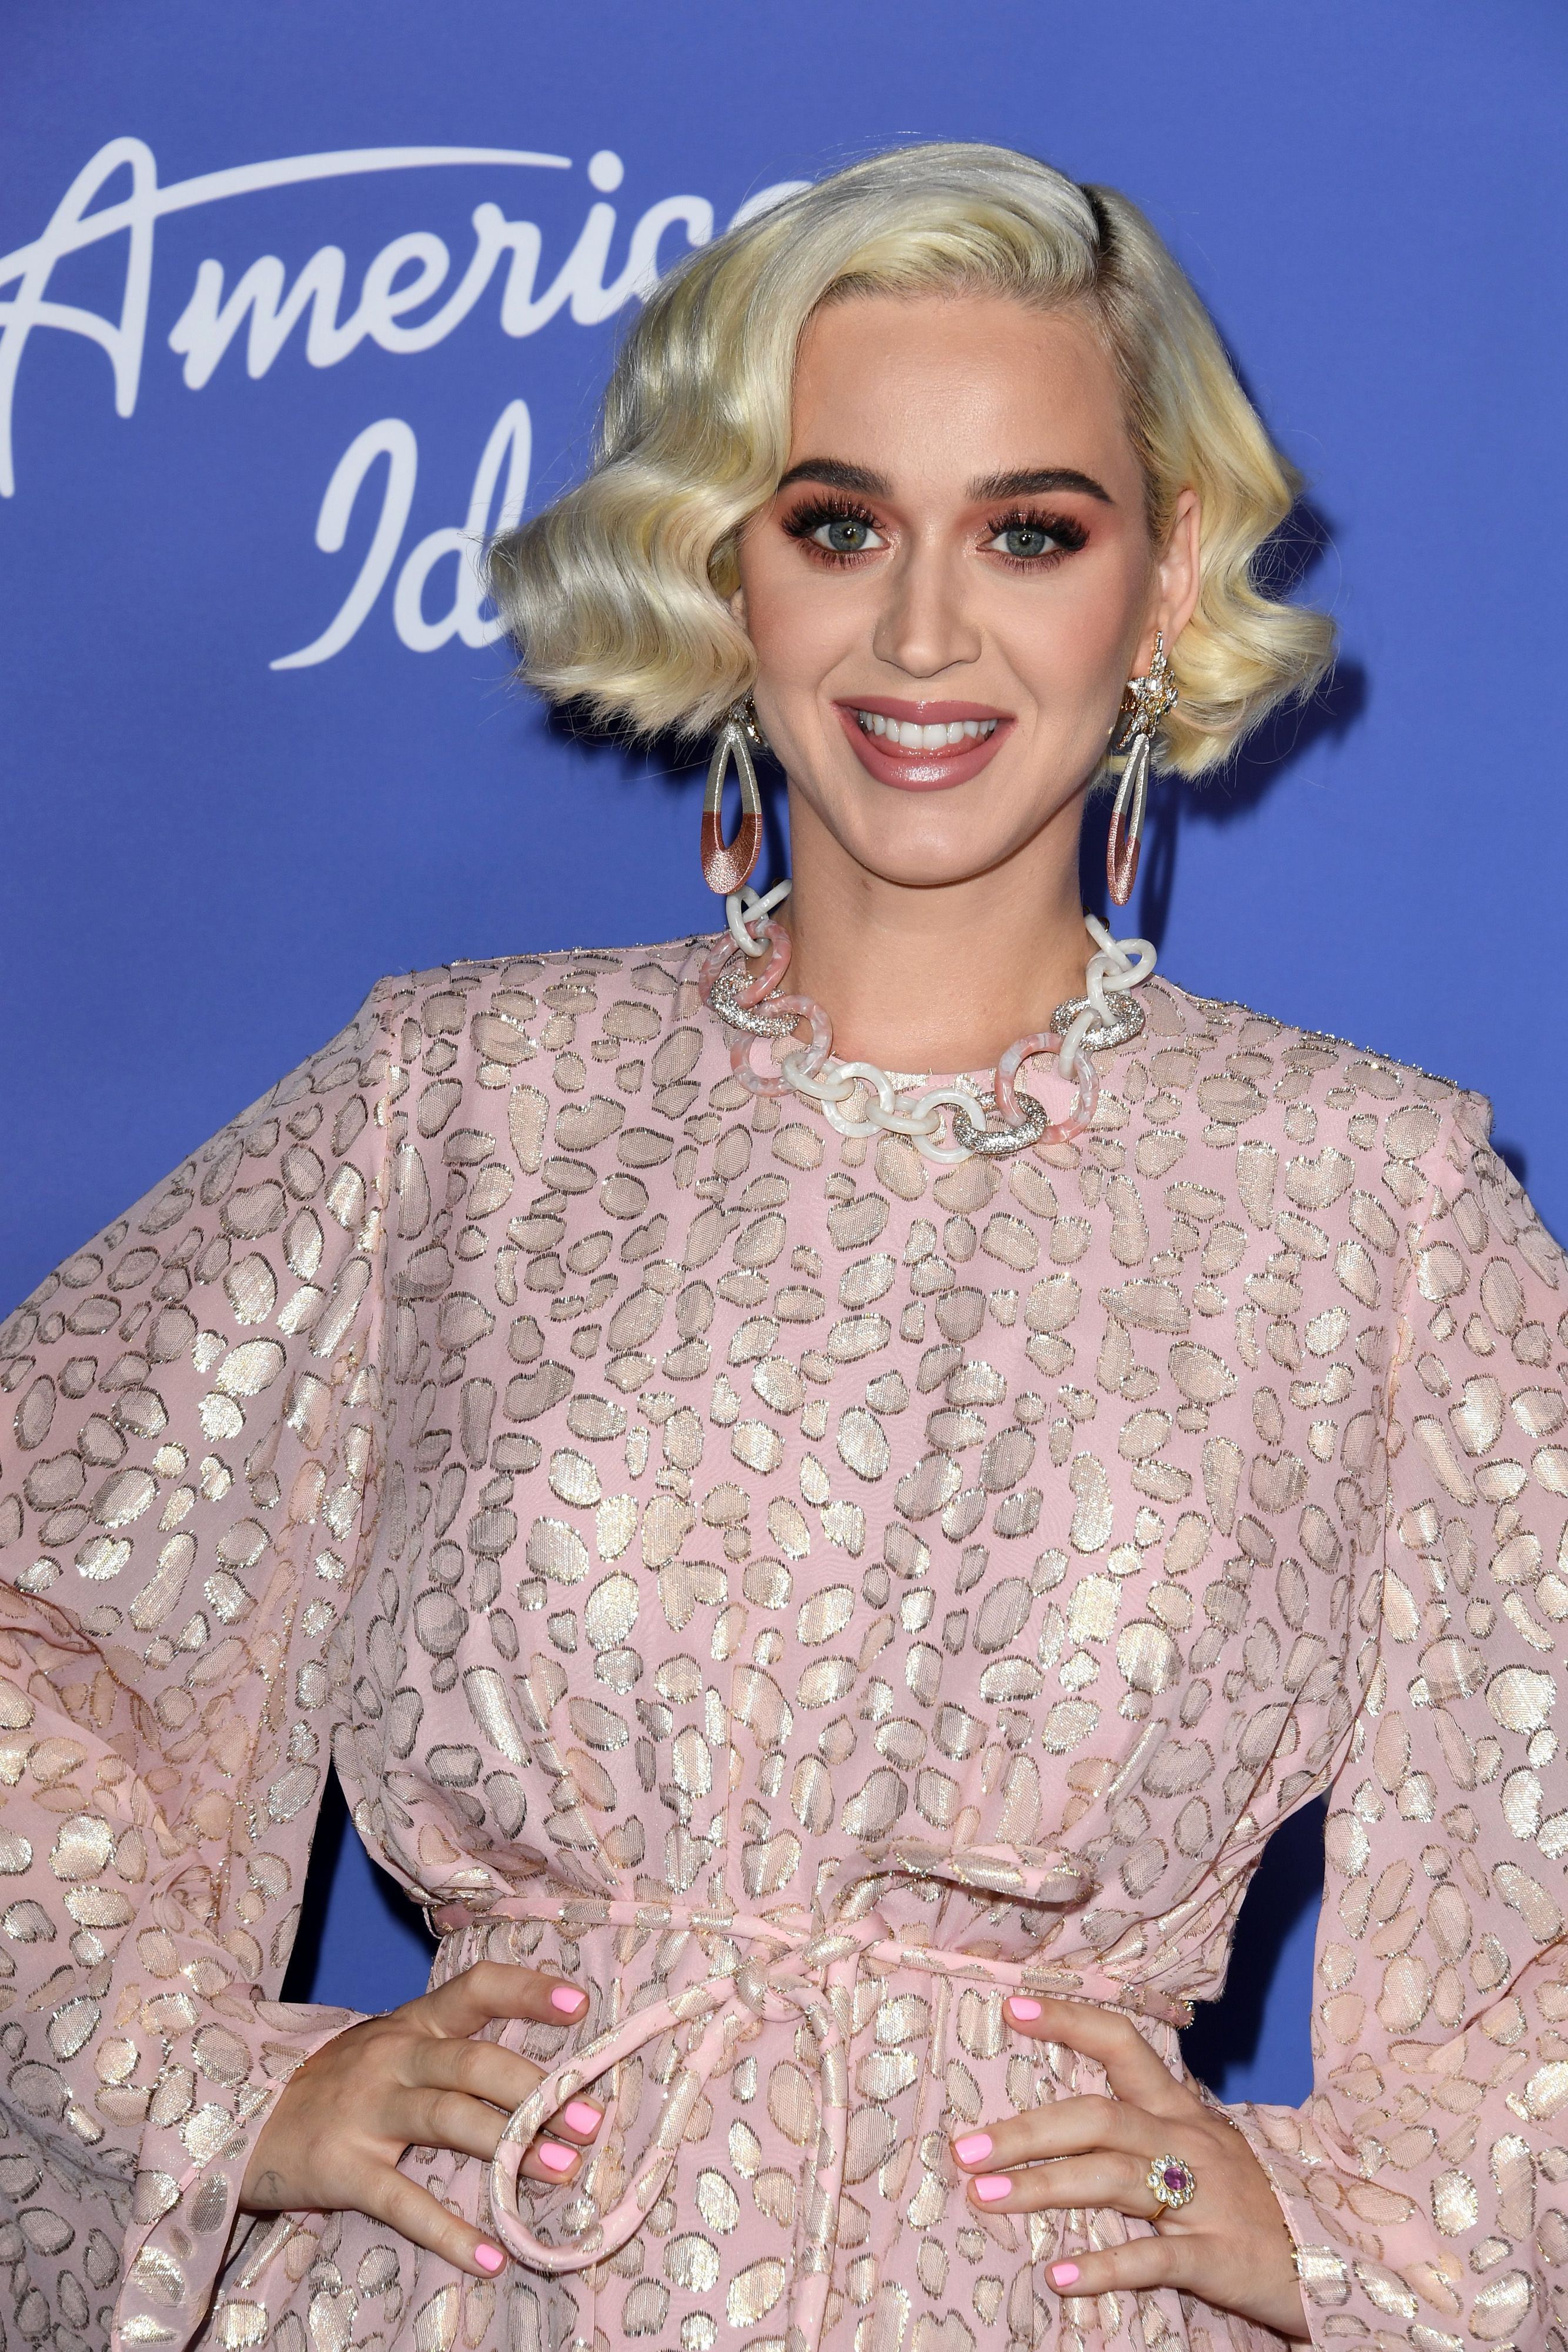 Katy Perry Shows Off Her New Flattering Bangs Cut On 'American Idol' And  Instagram